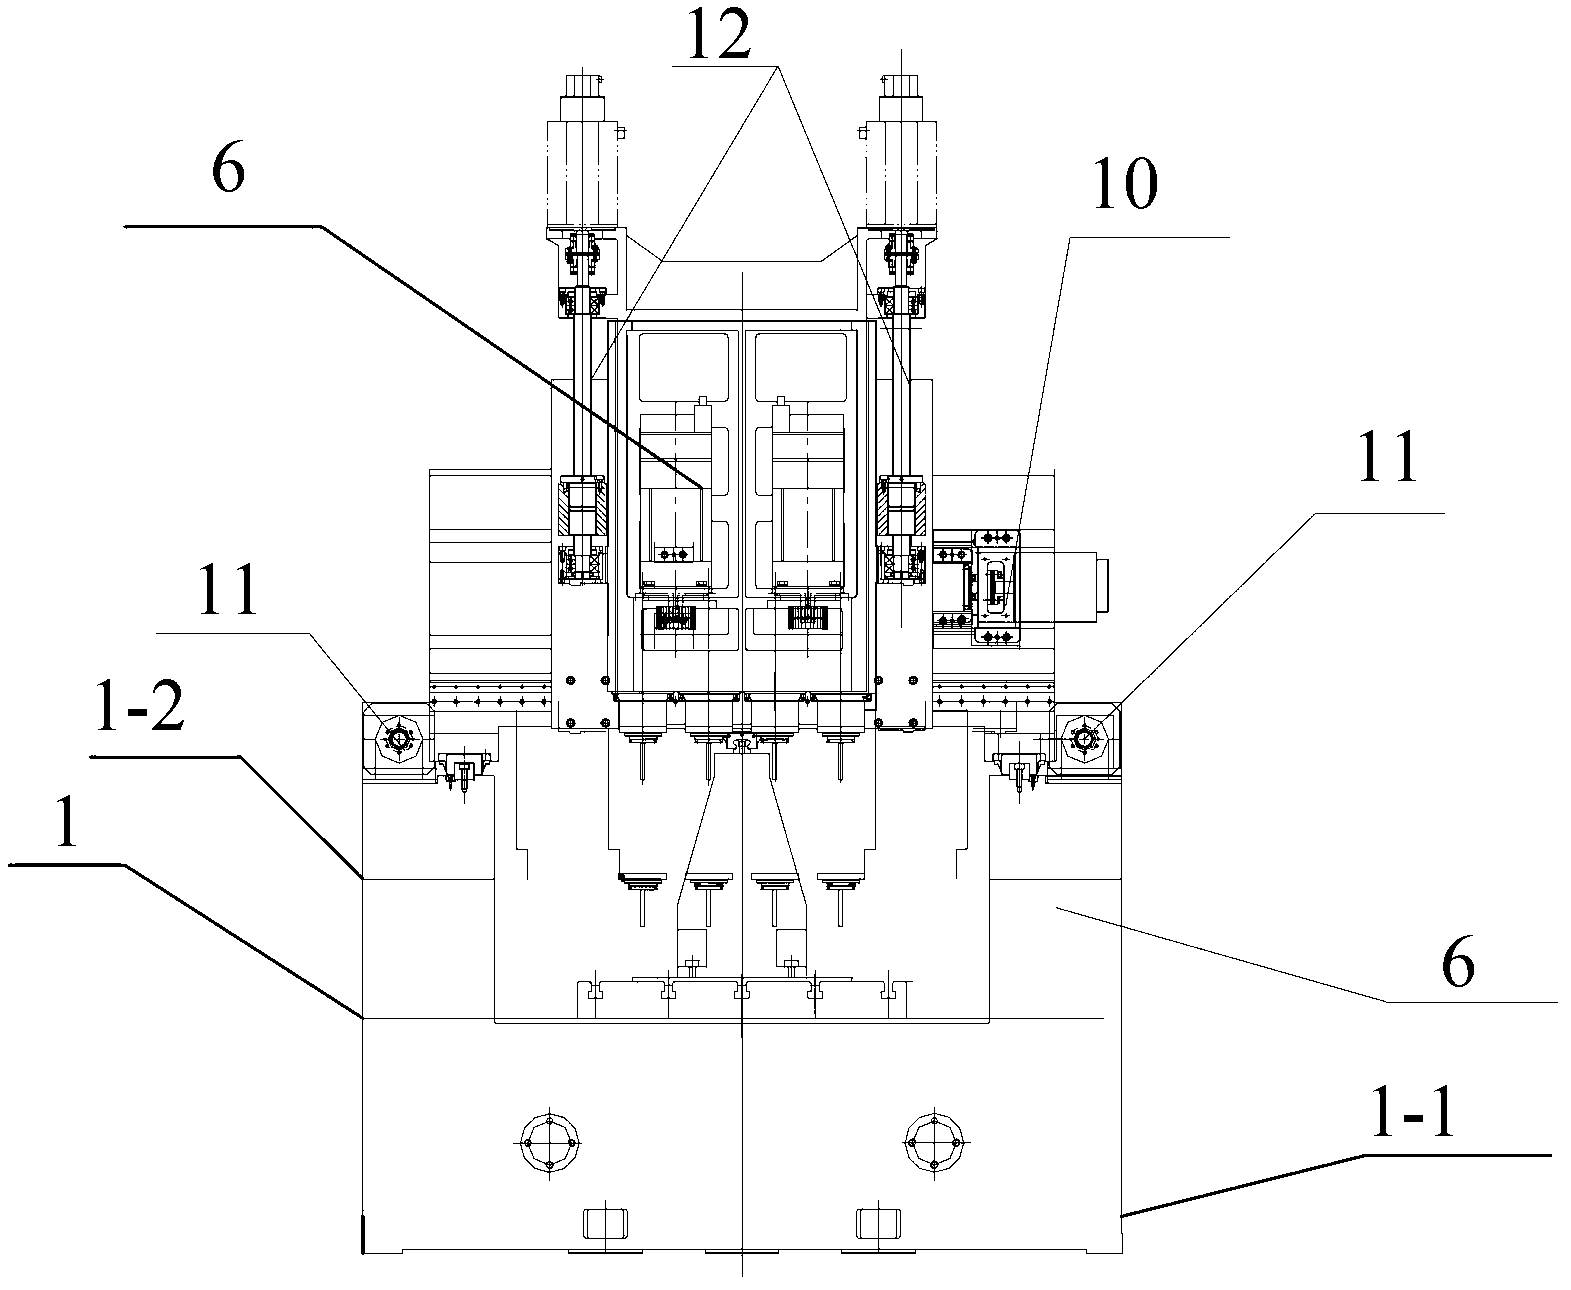 Multi-axis machining center structure